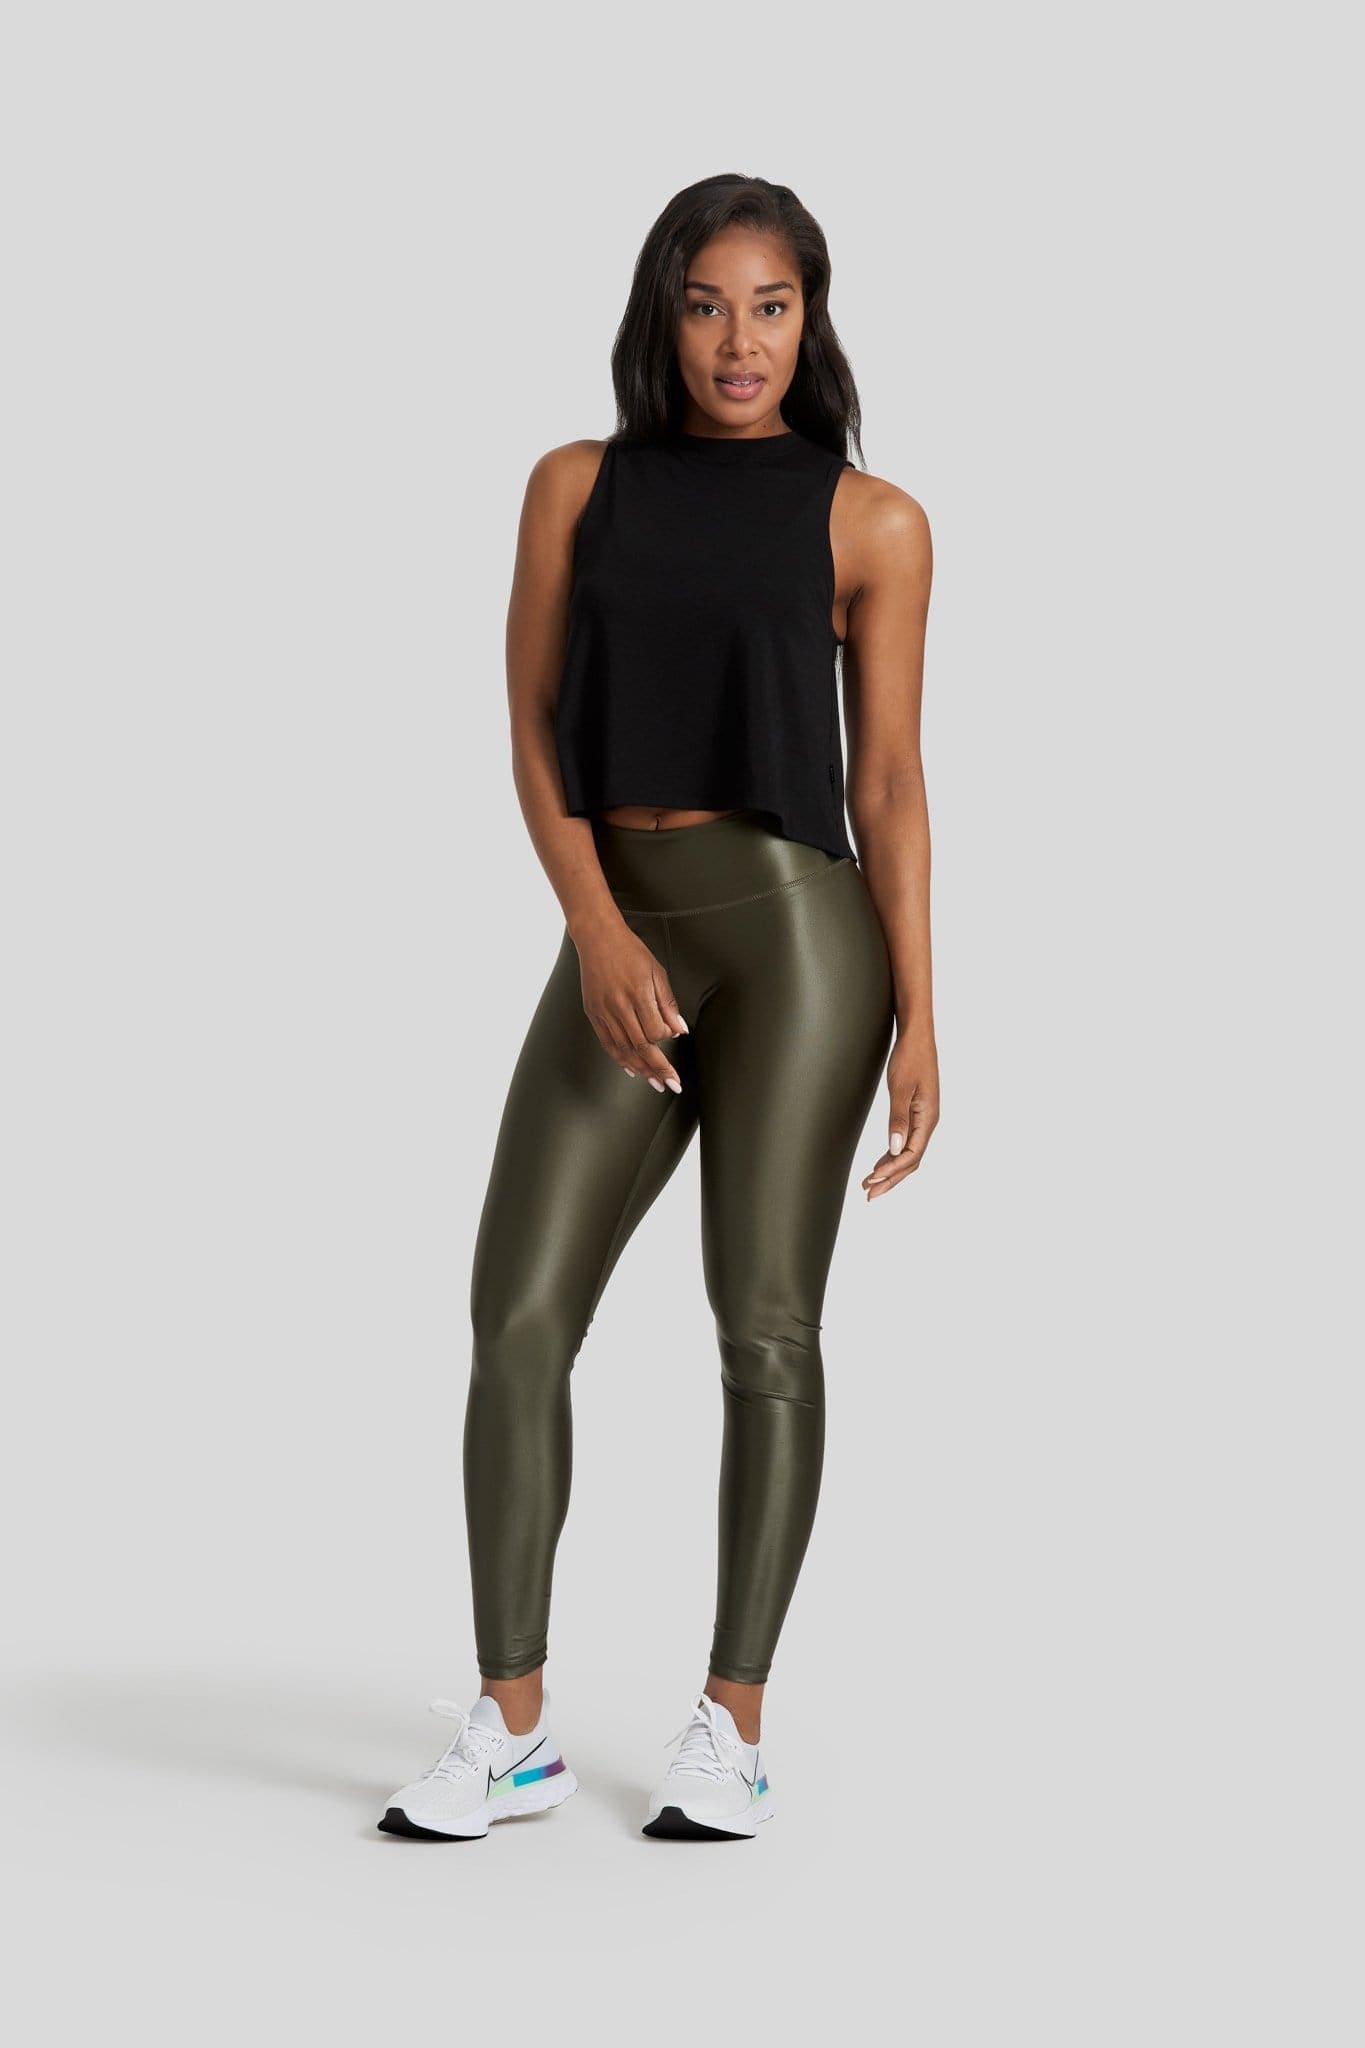 Nike Olive Green Leggings Size M - $22 - From Vee